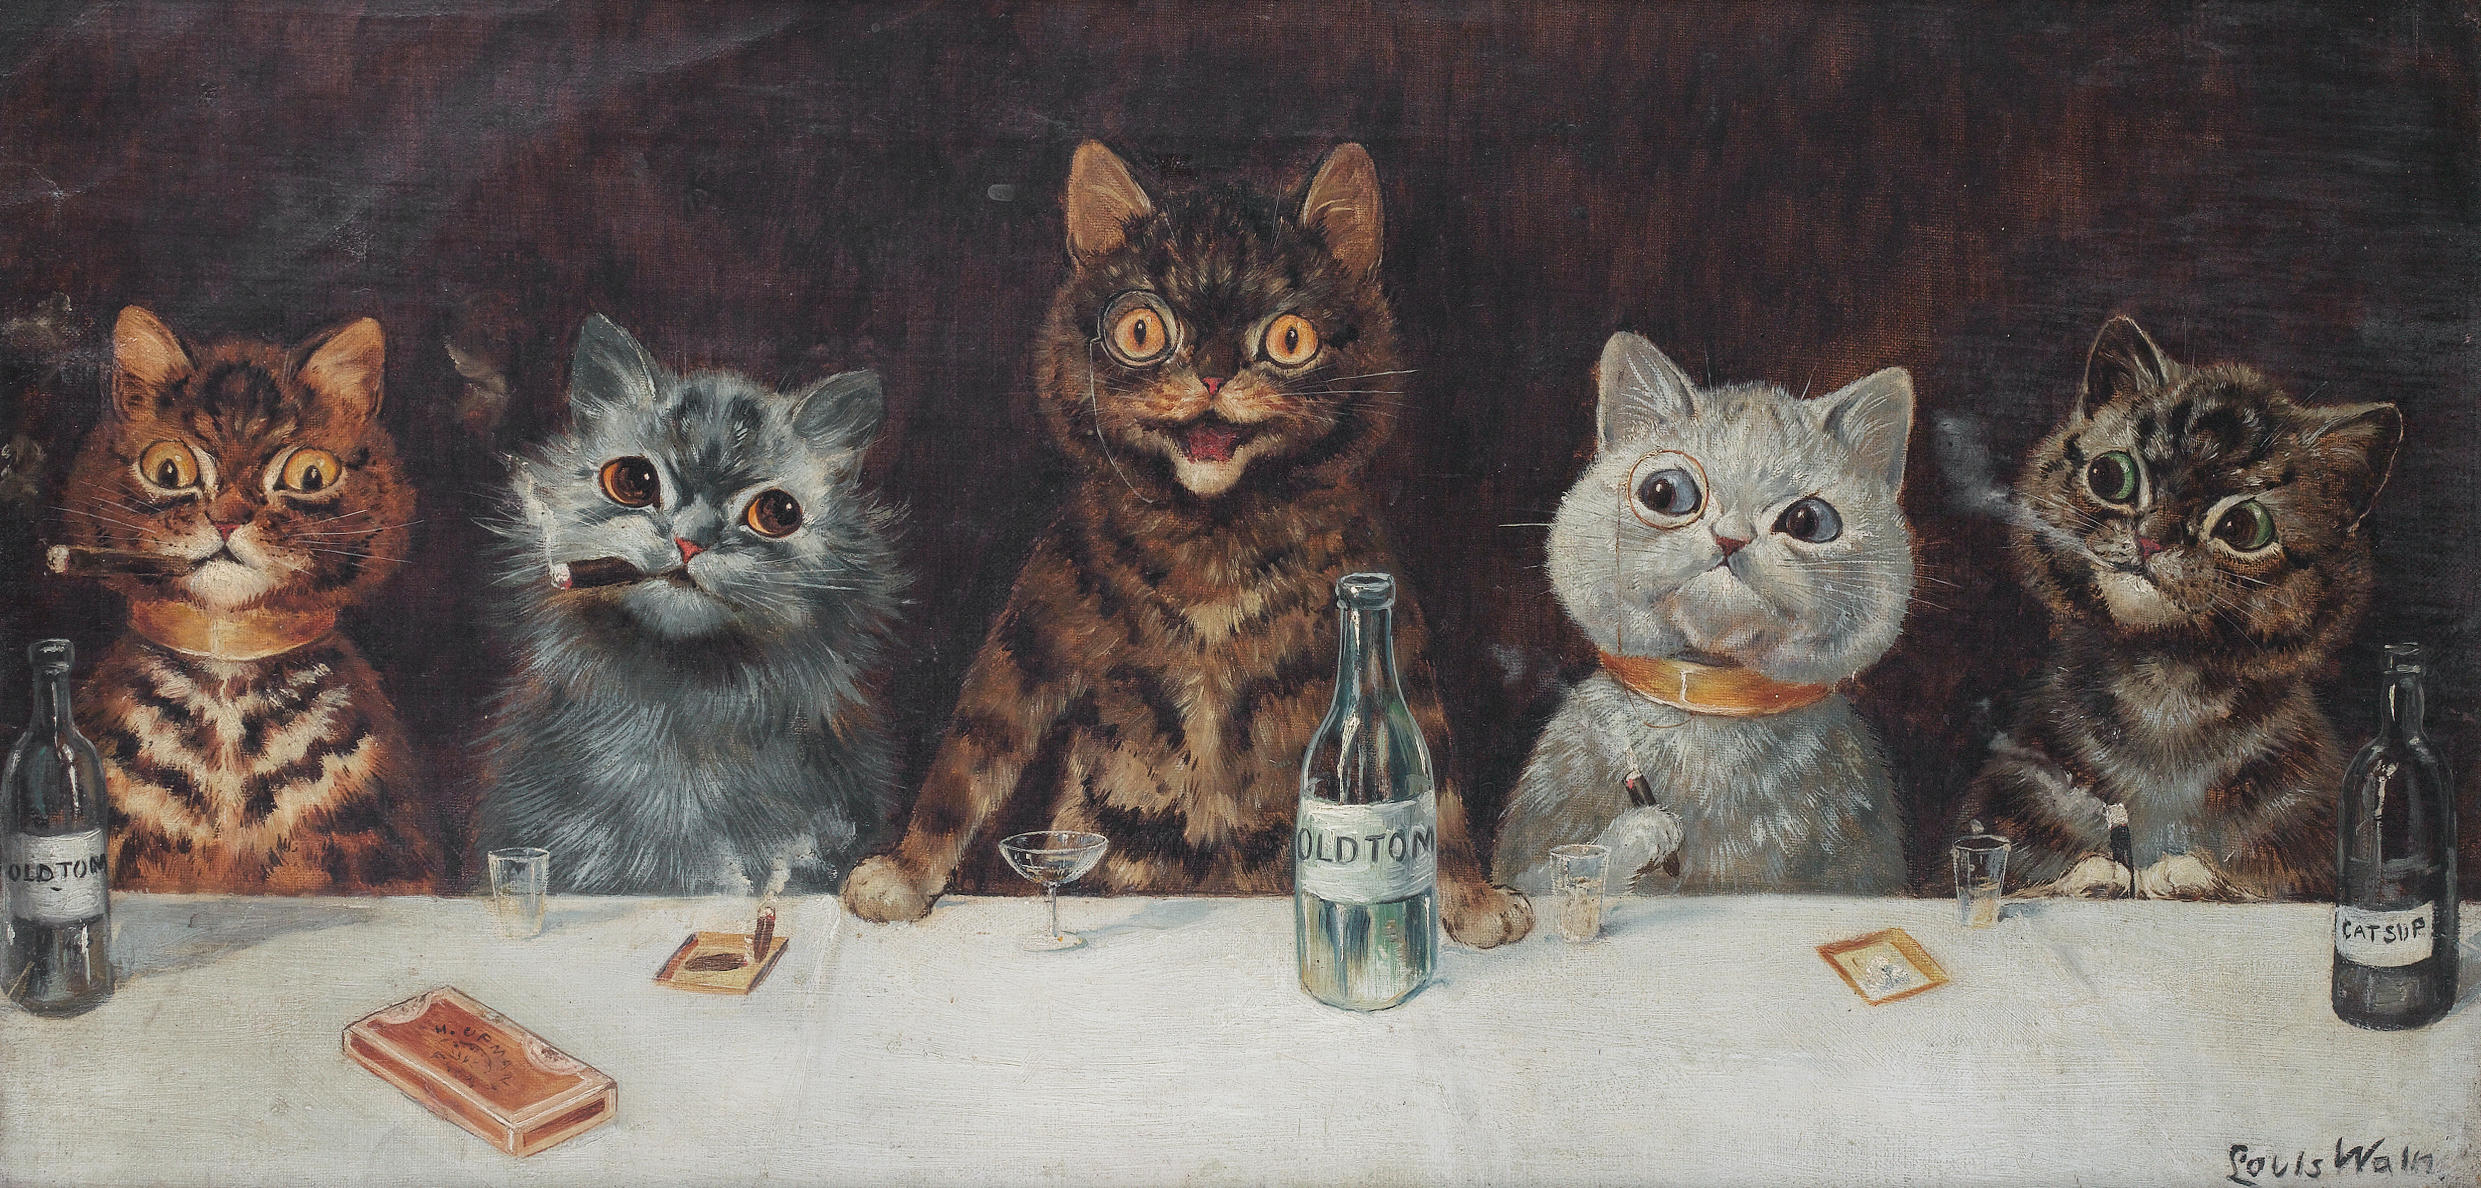 The Bachelor Party painting by Louis Wain showing anthropomorphised cats in a bar.